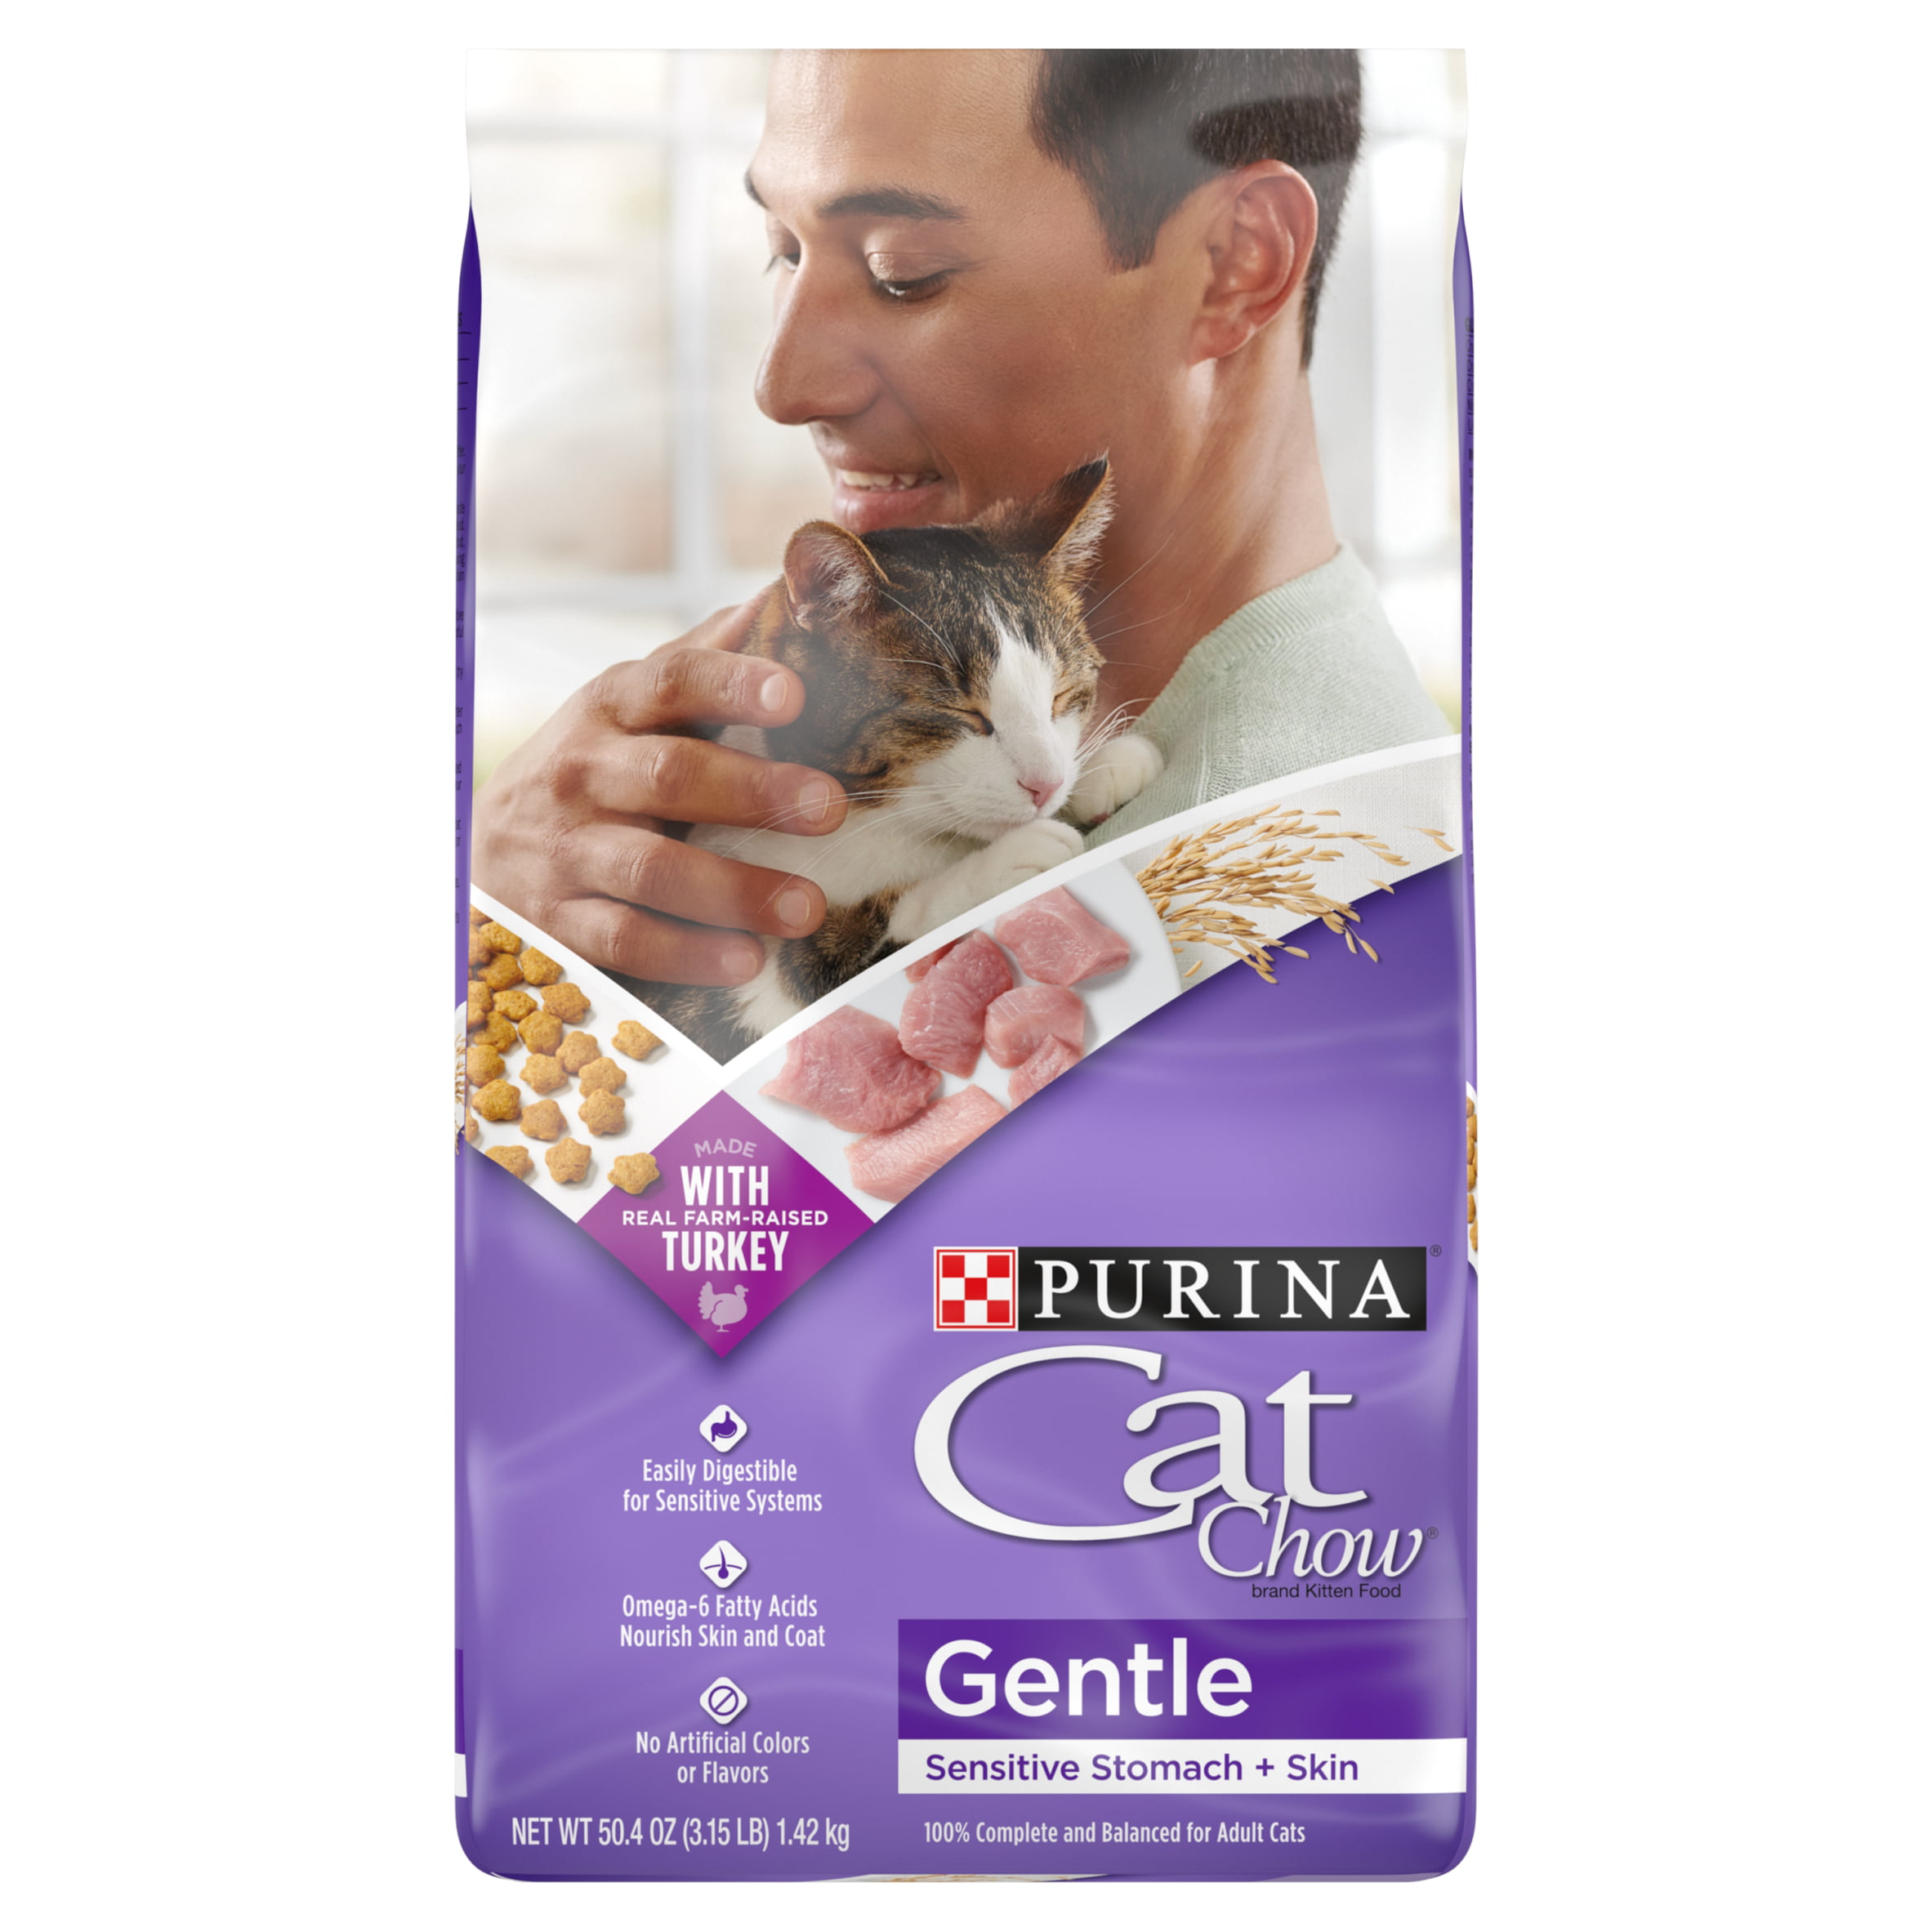 Purina Cat Chow Gentle Dry Cat Food, Sensitive Stomach + Skin, 3.15 lb